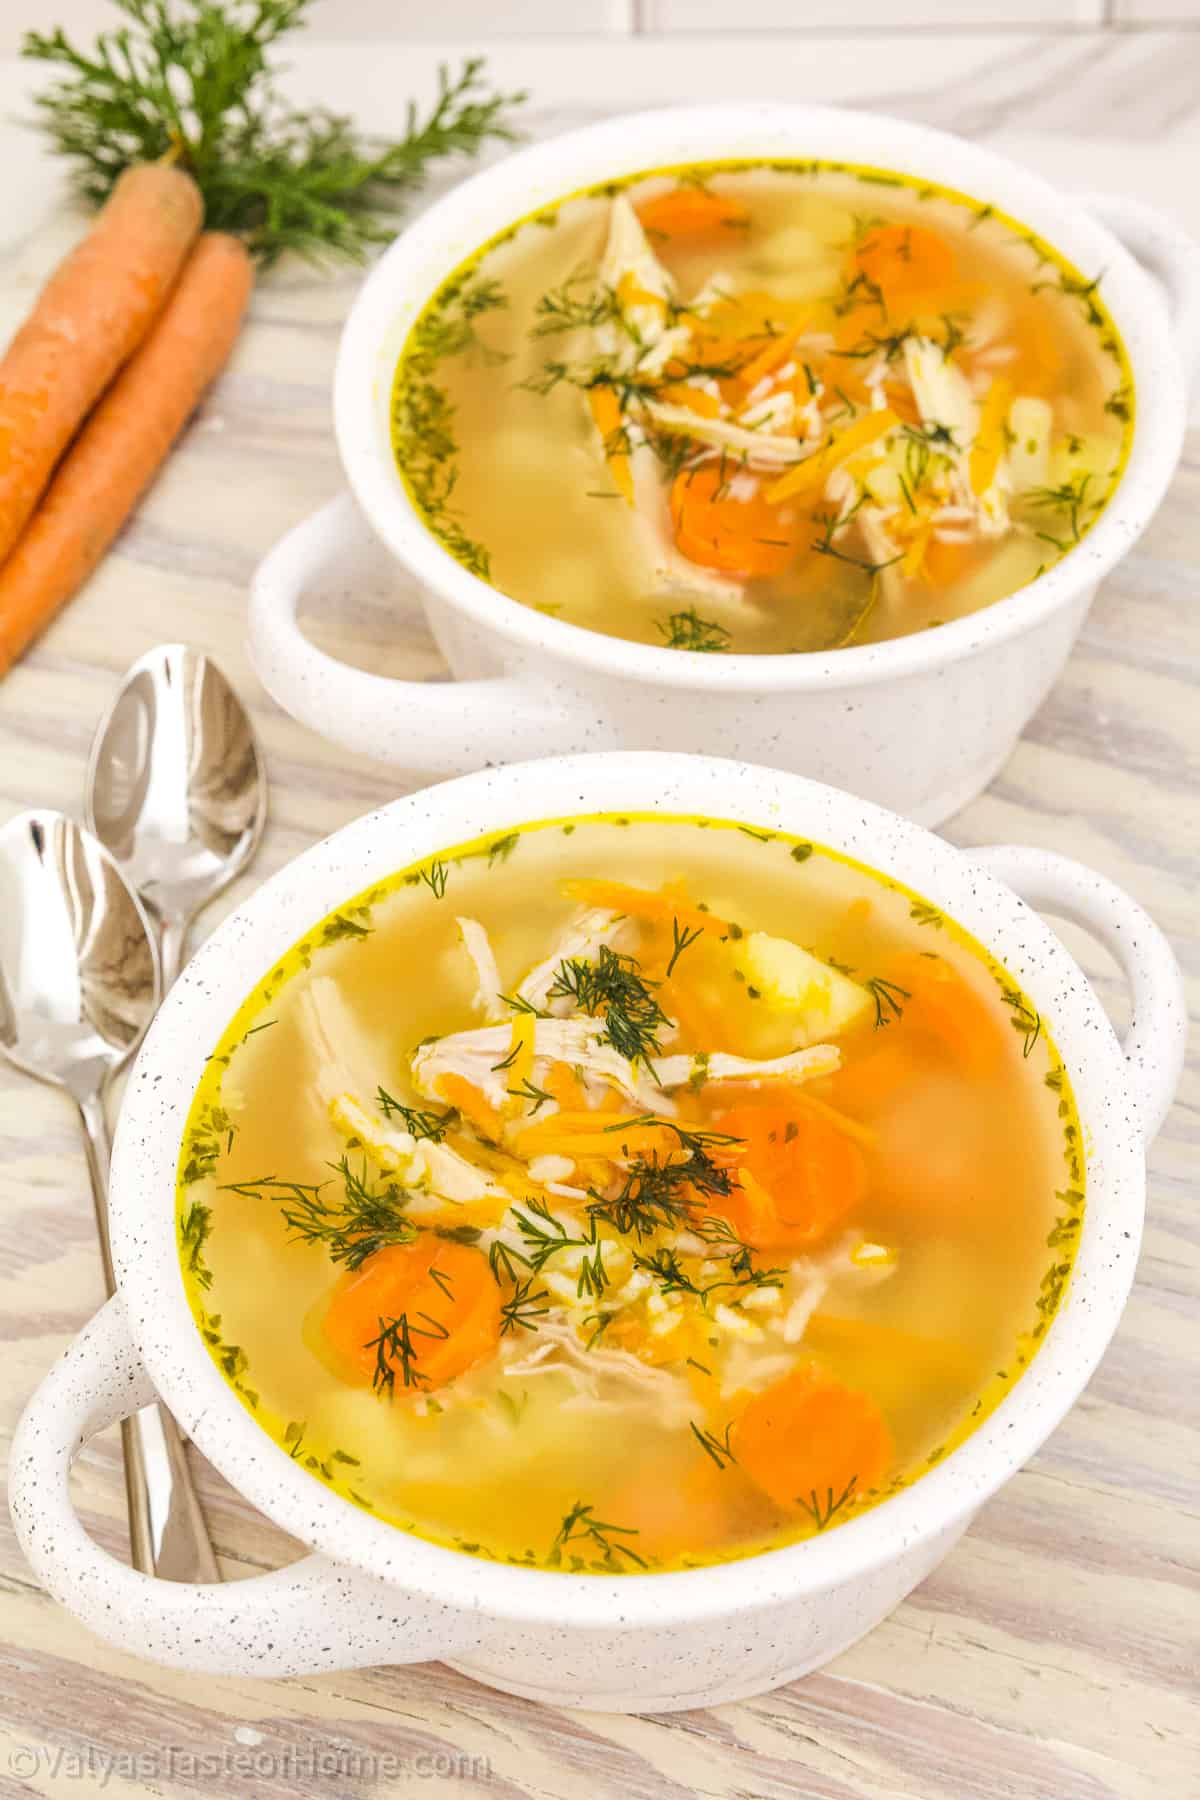 Regardless of how you go about making this soup, if you follow my instructions you’ll end up with the tastiest and most comforting soup ever!